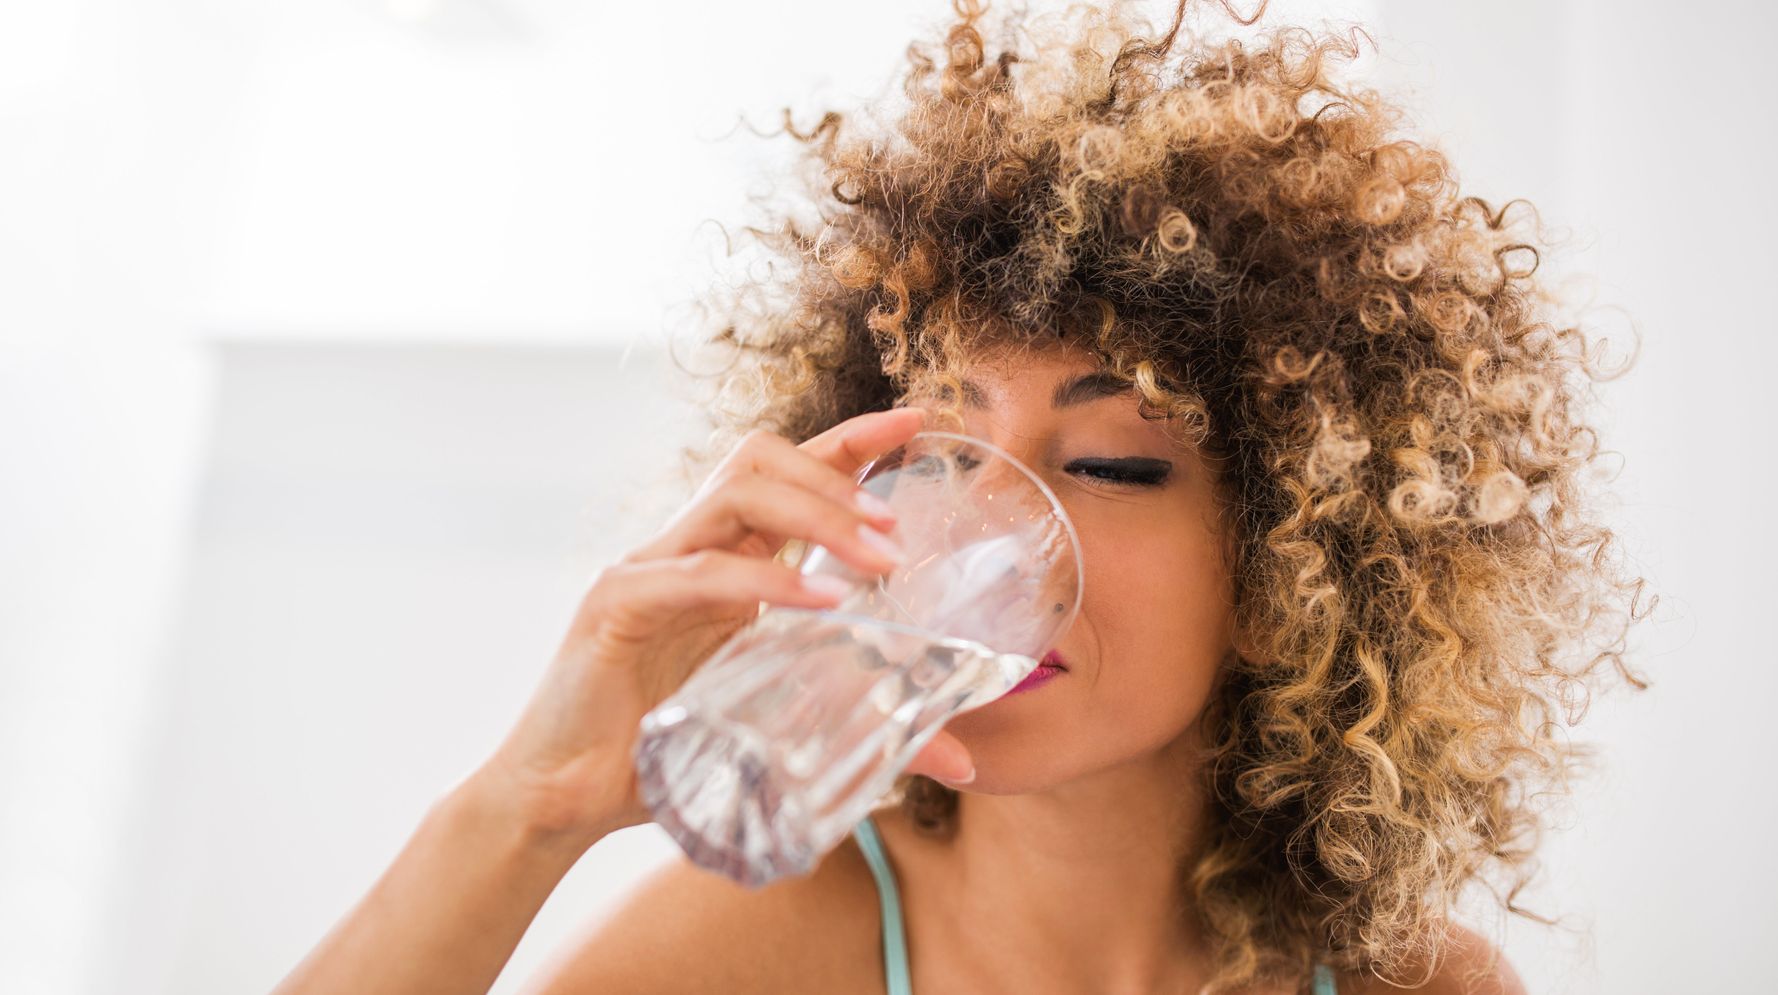 We're Drinking More Water. How to Hold It: That's the Question